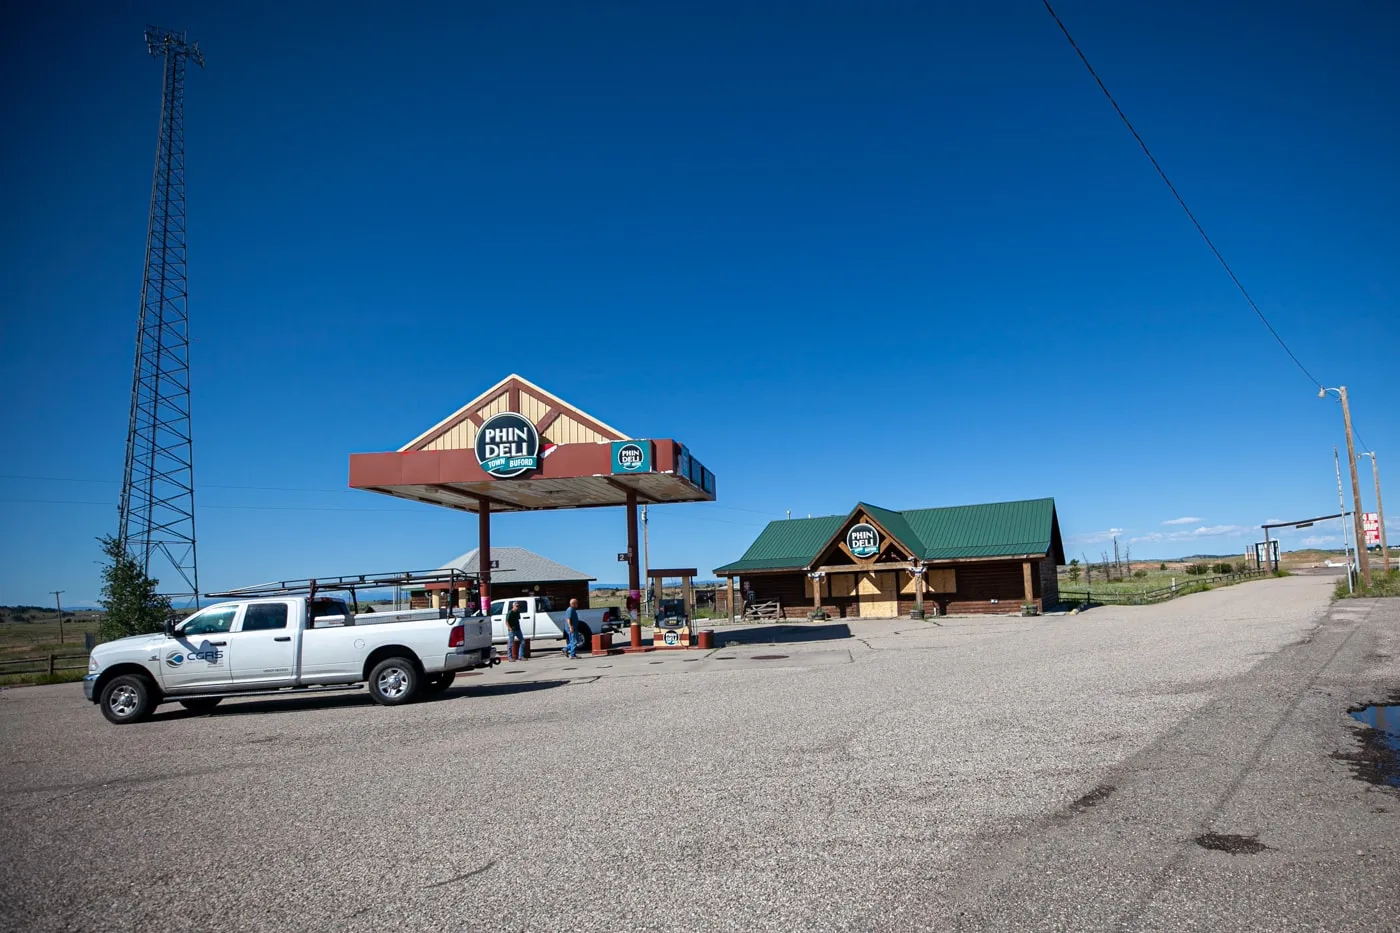 Buford, Wyoming: The Smallest Town in America with a population of 1 | Wyoming Roadside Attractions